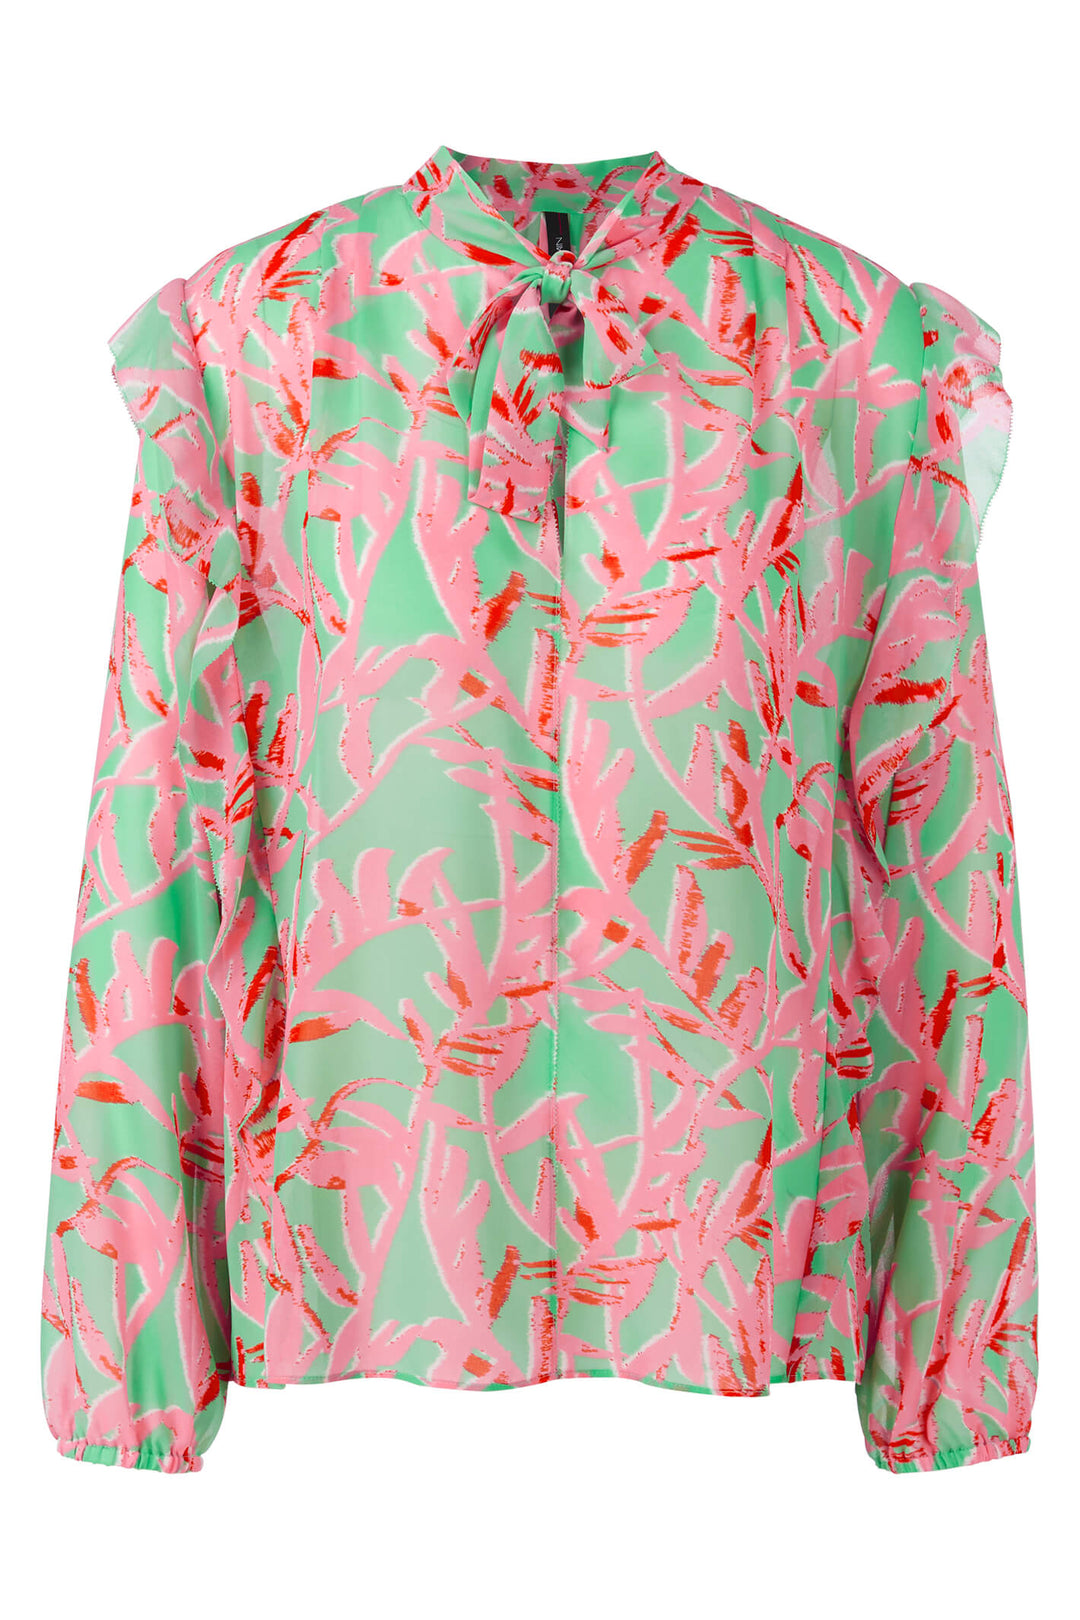 Marc Cain Collection UC 51.01 W43 Bright Jade Green Print Blouse - Olivia Grace Fashion